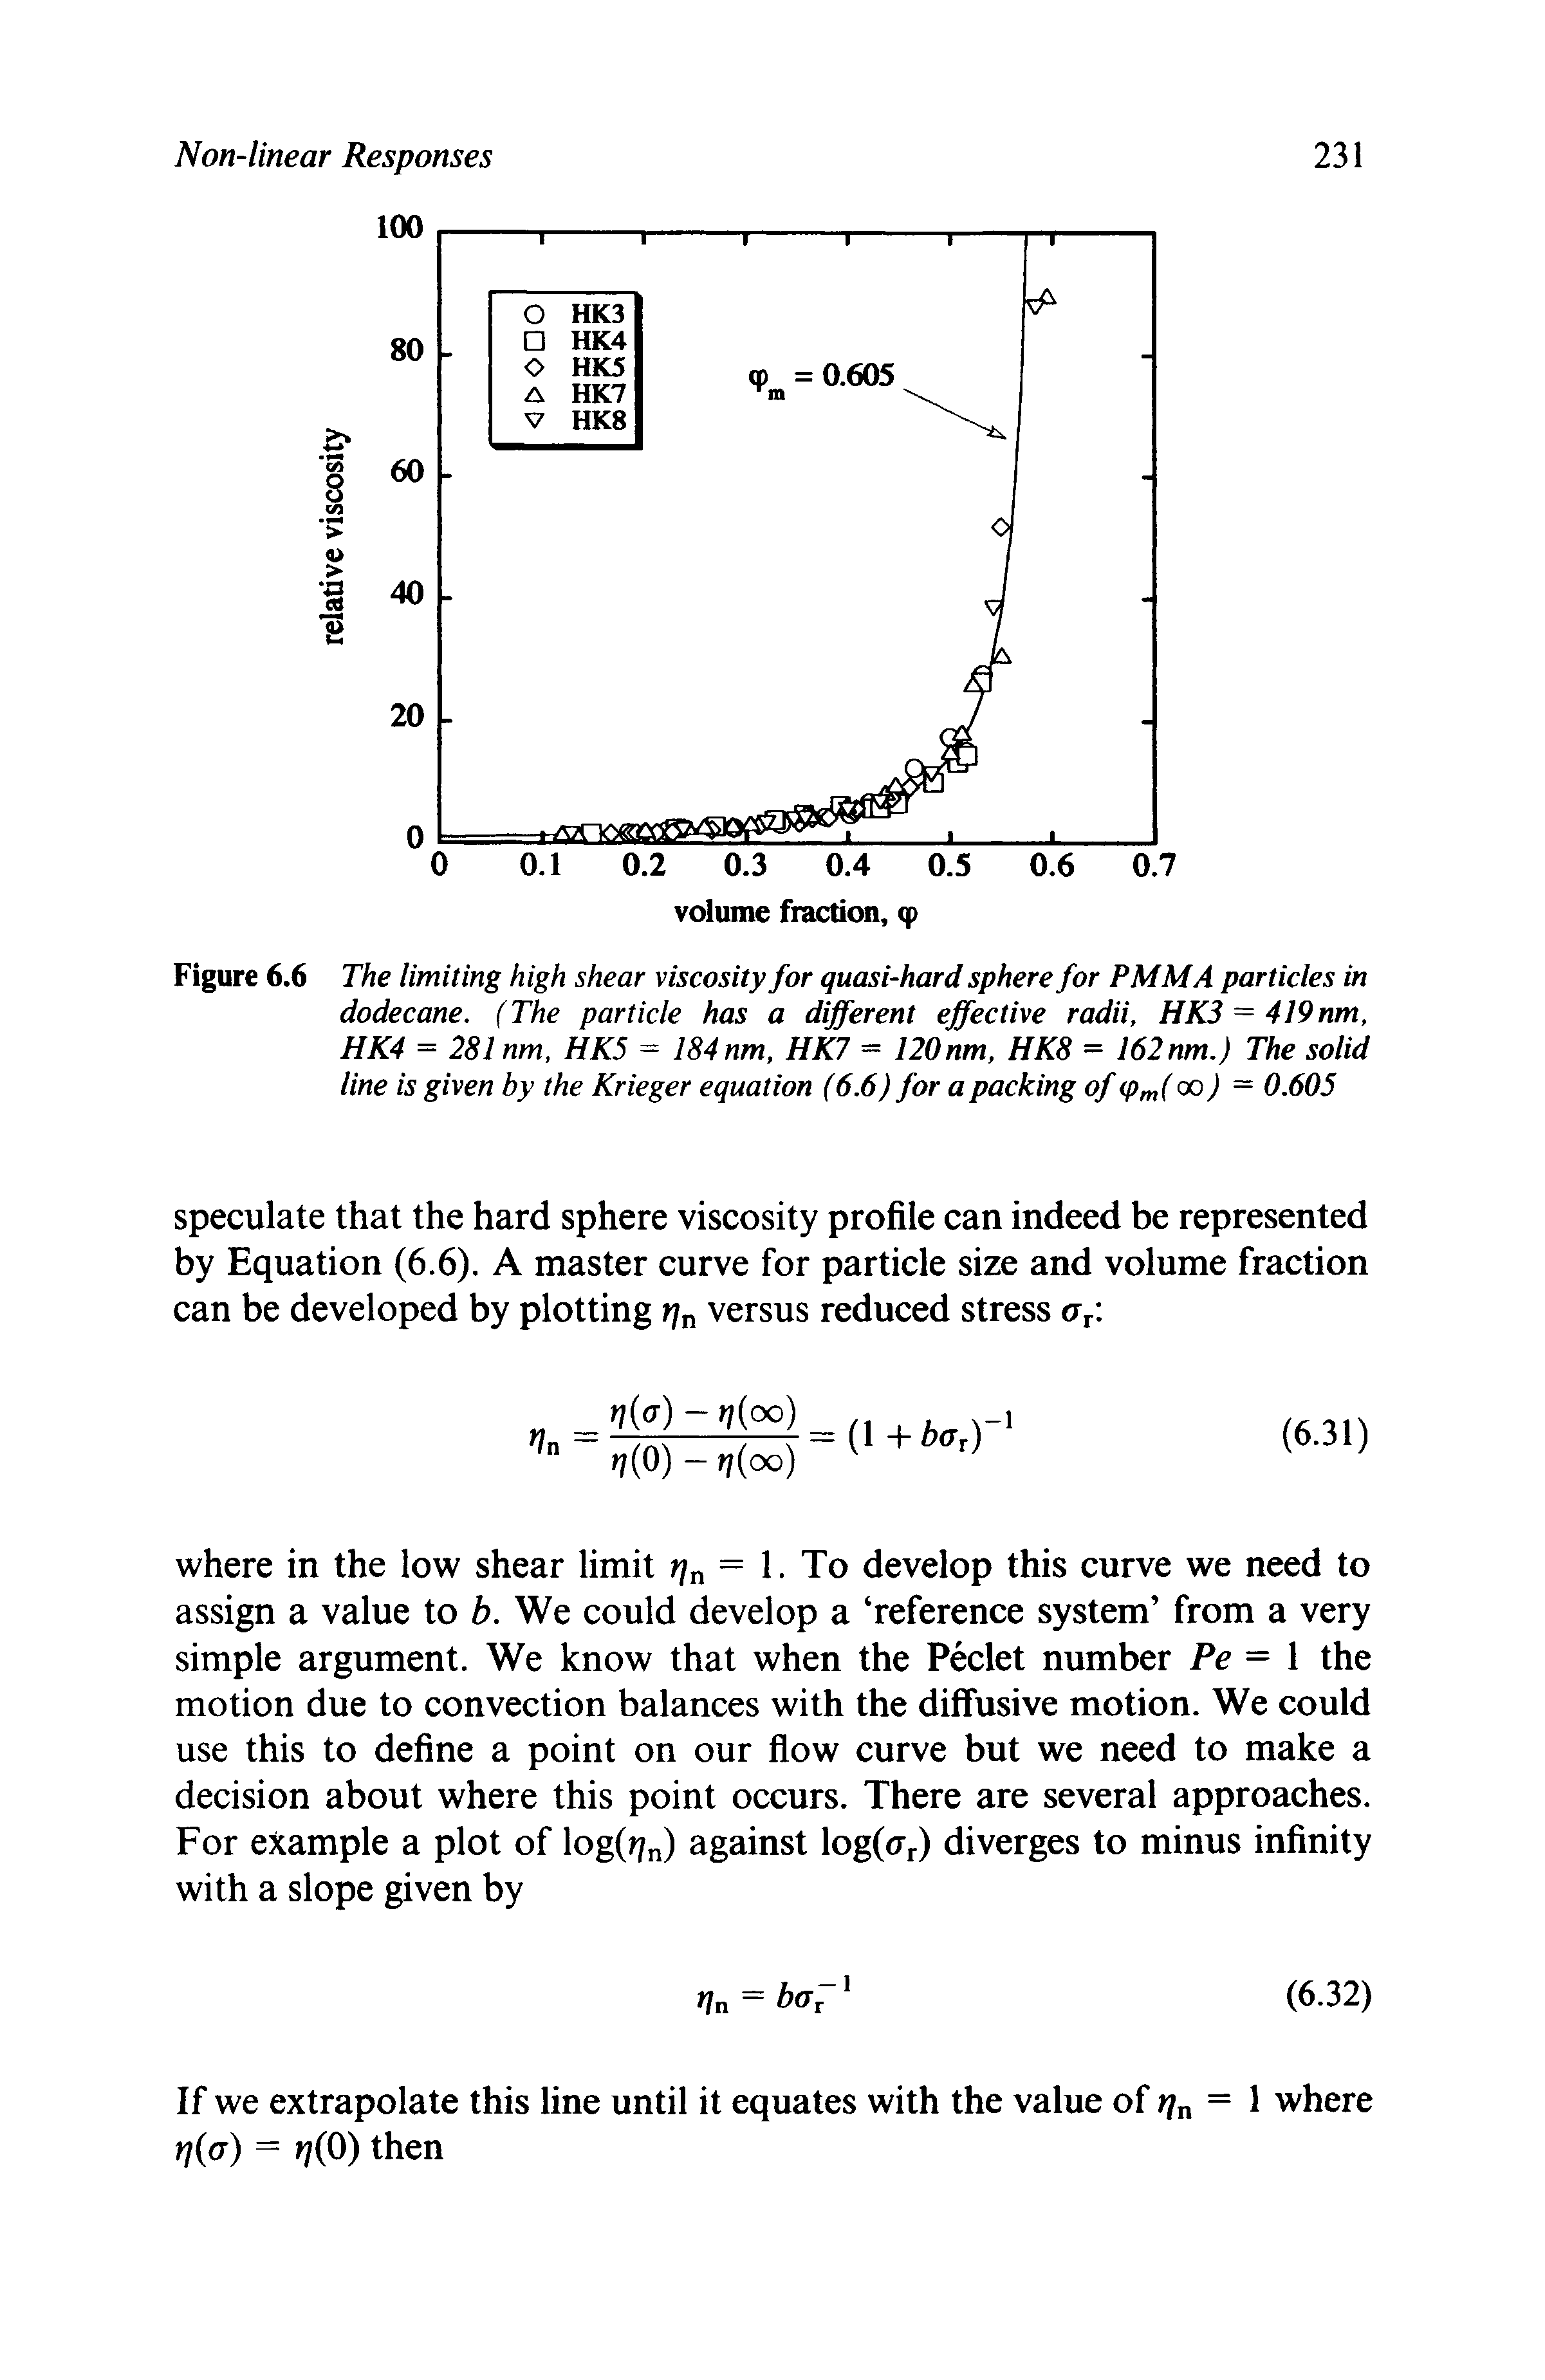 Figure 6.6 The limiting high shear viscosity for quasi-hard sphere for PMMA particles in dodecane. (The particle has a different effective radii, HK3 = 419nm, HK4 = 281 nm, HK5 = 184 nm, HK7 = 120nm, HK8 = 162 nm.) The solid line is given by the Krieger equation (6.6) for a packing of (pm( oo) = 0.605...